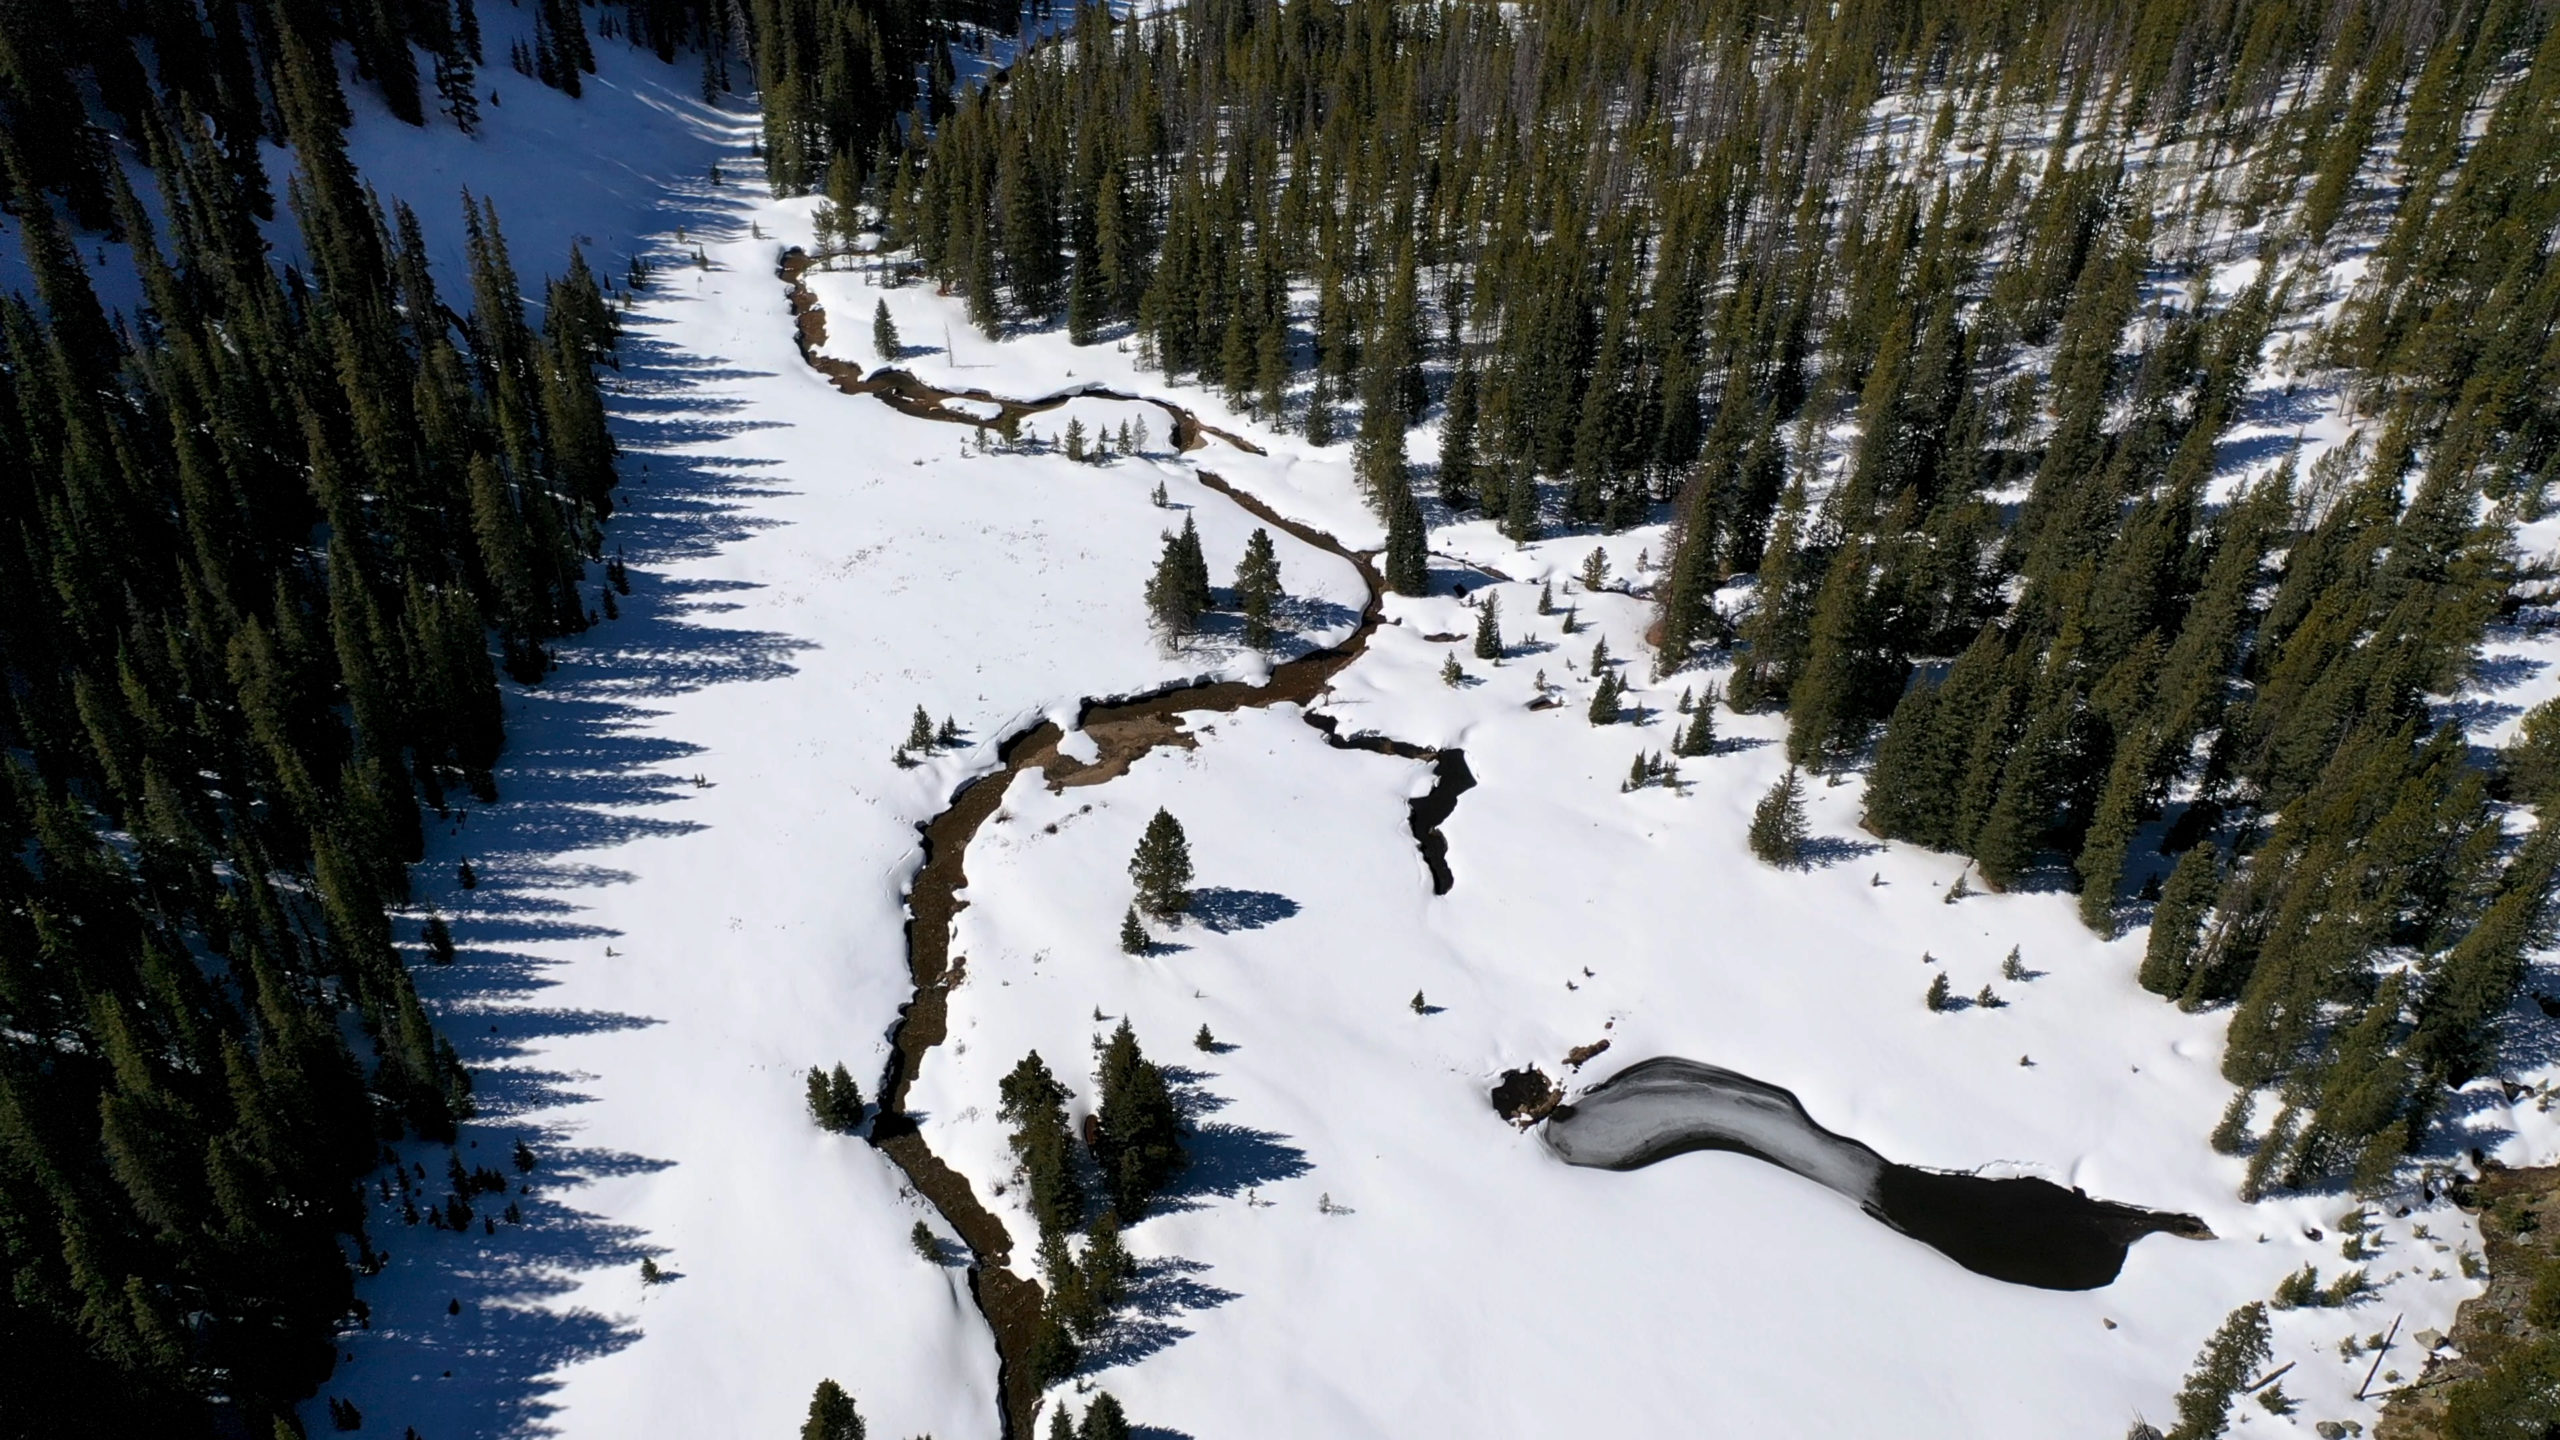 The North Fork of the Snake River in Summit County near Arapahoe Basin Ski Area on April 29, 2020. Photo credit: Denver Water.